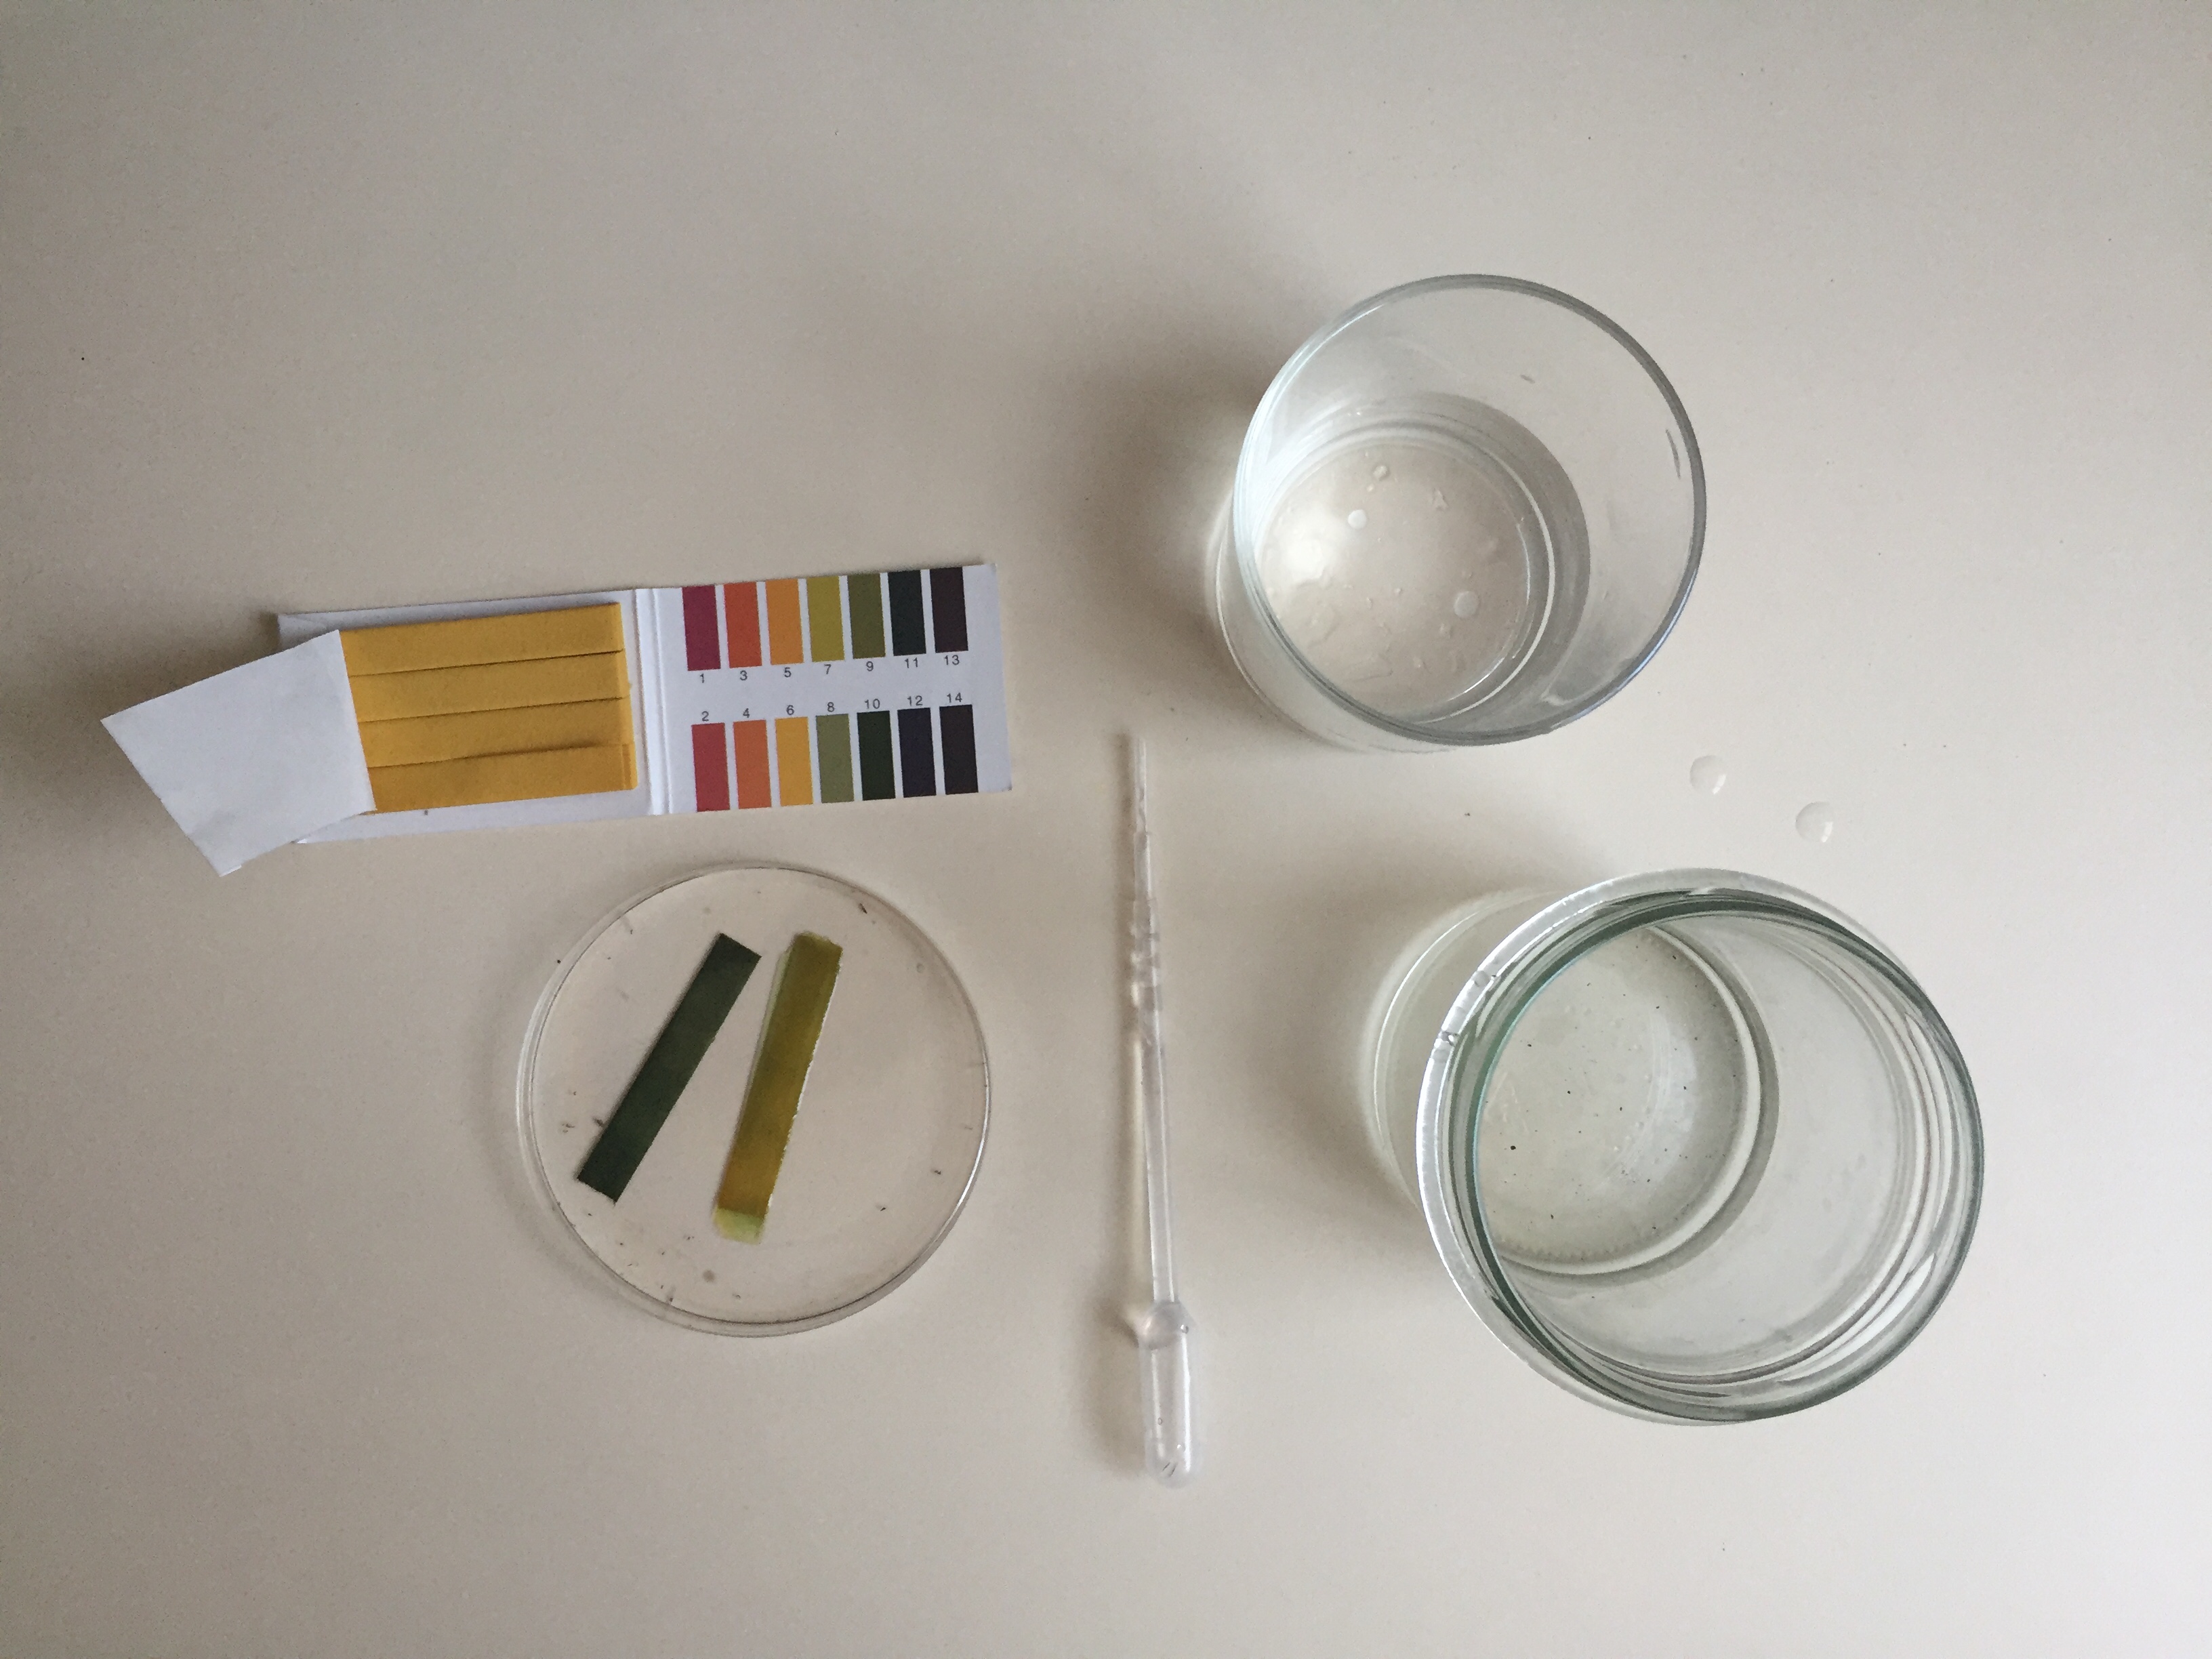 On the left side, a petri dish with two litmus paper tests, a plastic doser, one glass of tap water, one jar of raindrops.